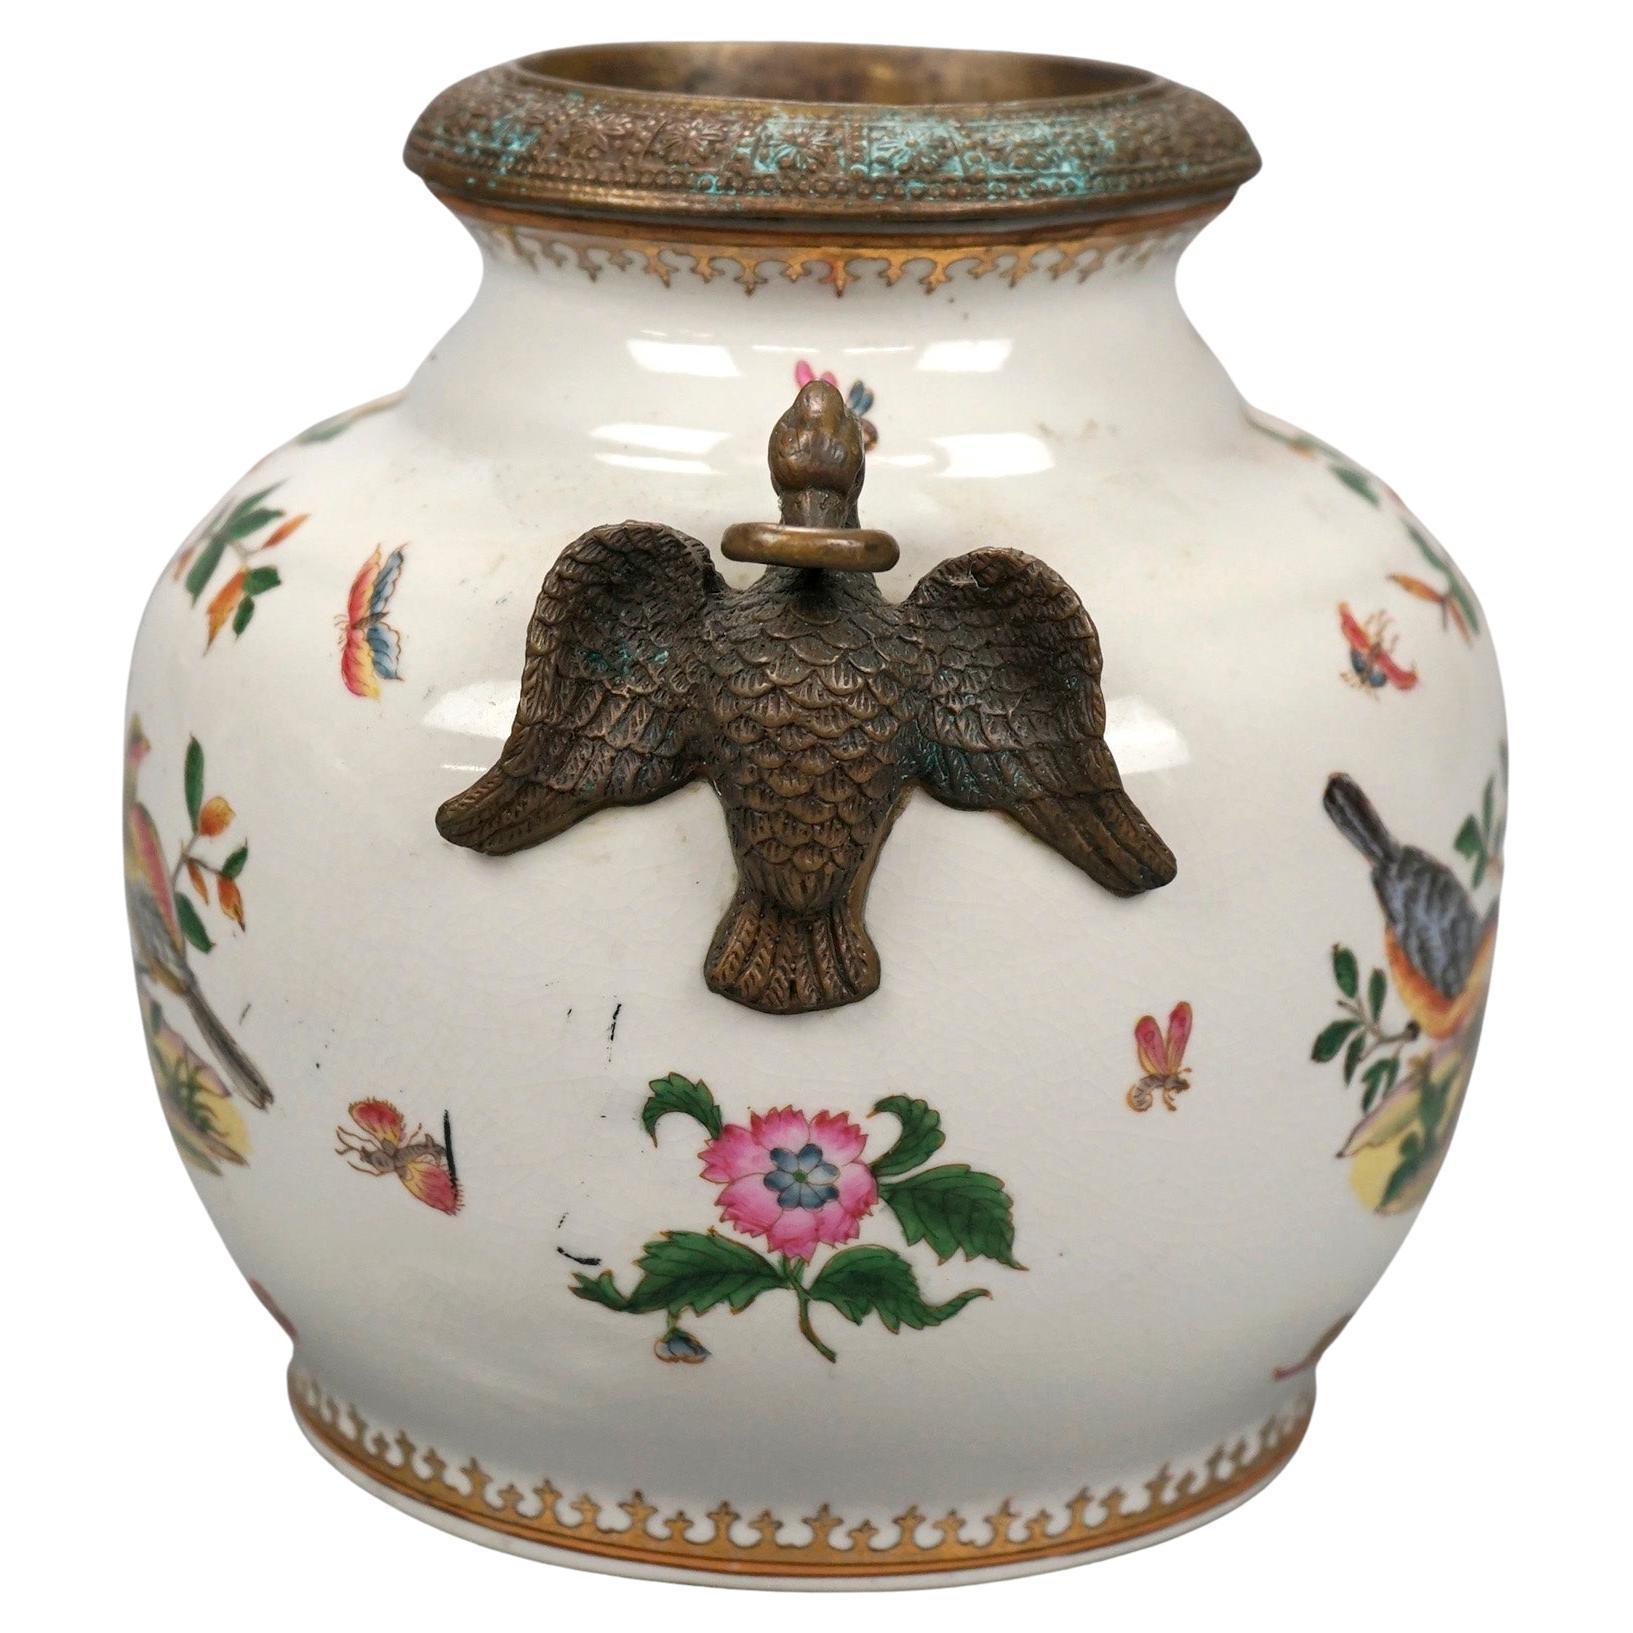 A pair of Chinese game pots offer porcelain construction with bird and foliate paint decoration and flanking figural bird handles, maker stamp on bases as photographed, 20th century

Measures- 8.5'' H x 8.25'' W x 9.5'' D.